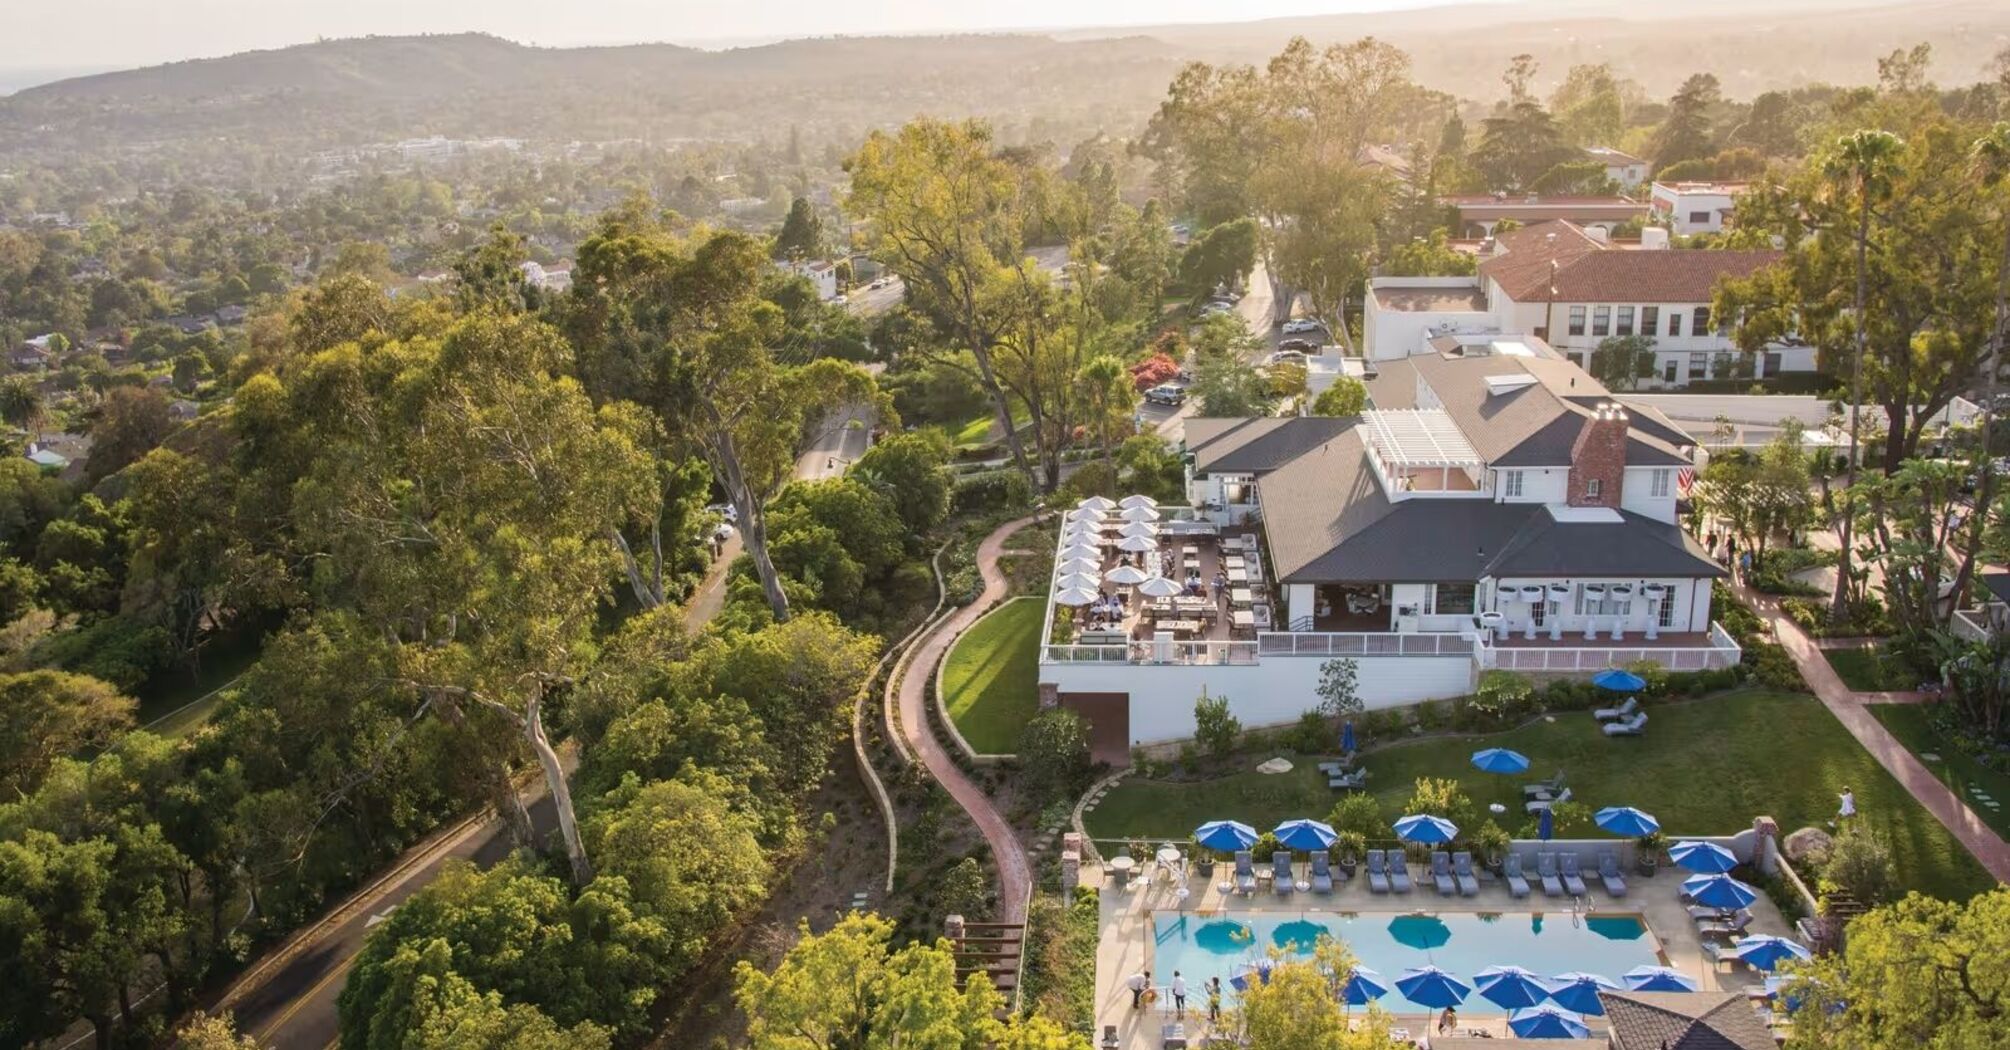 Top 8 Santa Barbara hotels: from a Victorian estate with landscaped gardens to a famous boutique with the best roof in town